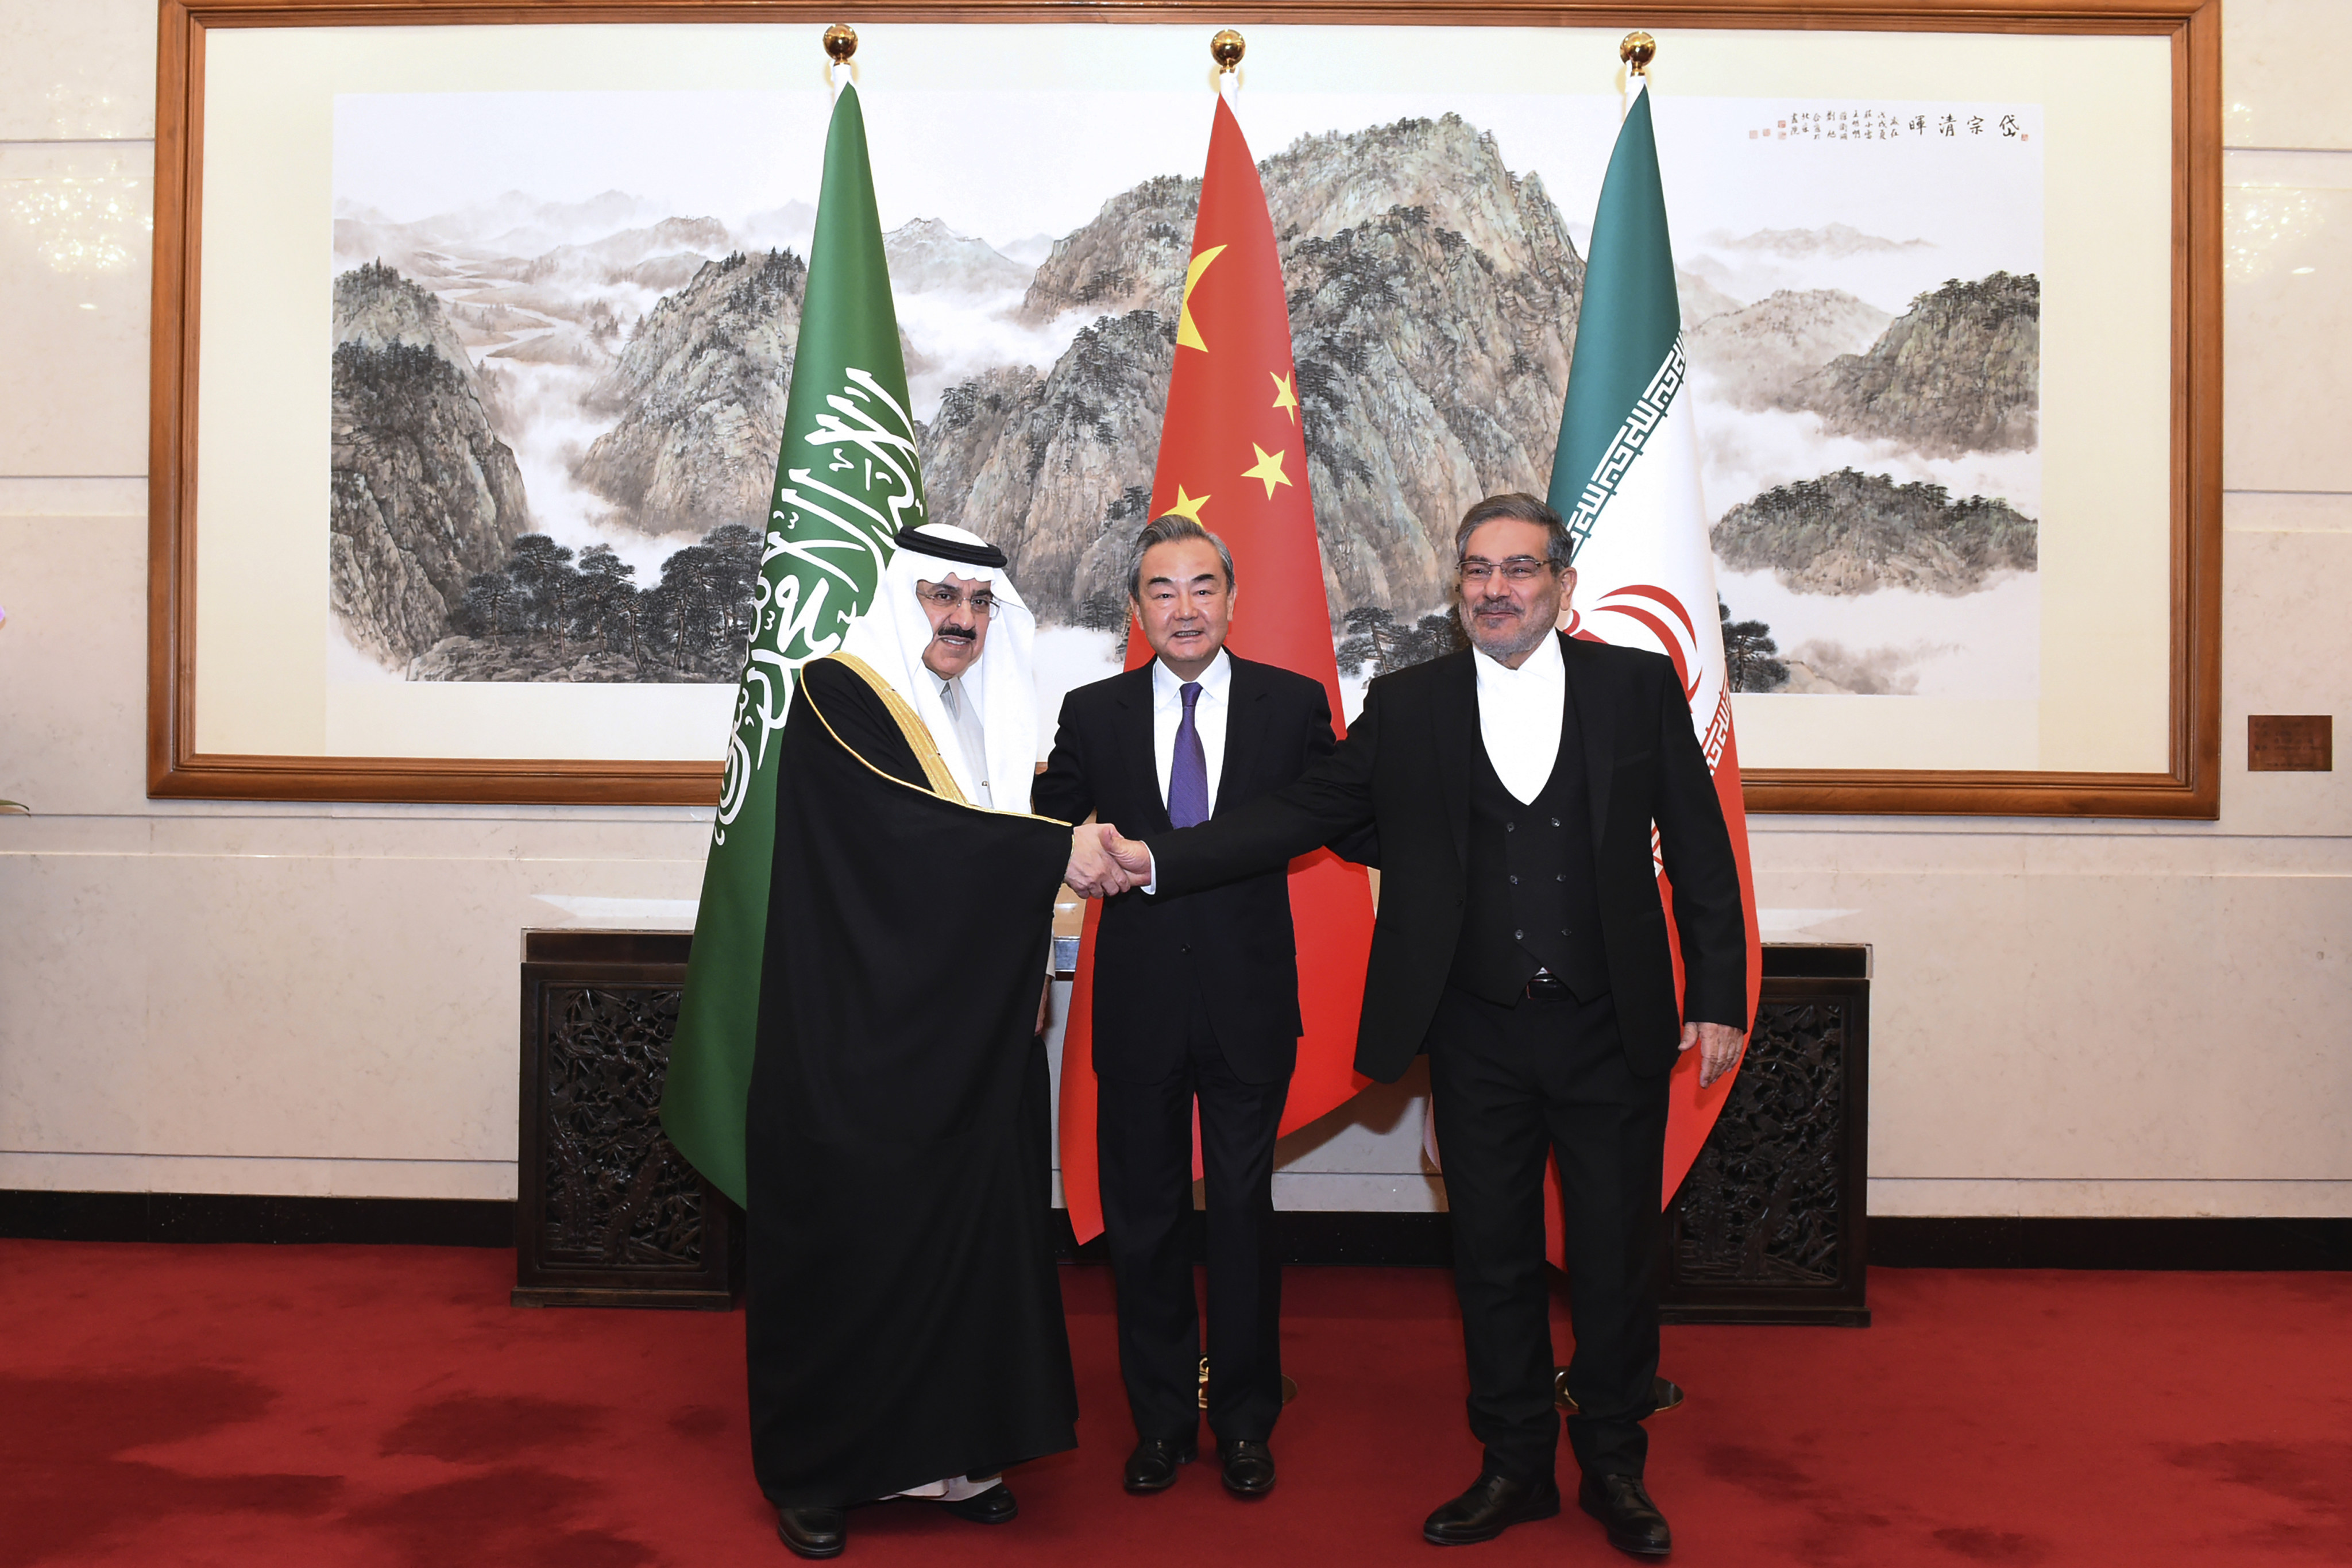 Ali Shamkhani (right), the secretary of Iran’s Supreme National Security Council, shakes hands with Saudi Arabian national security adviser Musaad bin Mohammed al-Aiban (left) as China’s top diplomat Wang Yi looks on in Beijing on Saturday. Photo: Xinhua